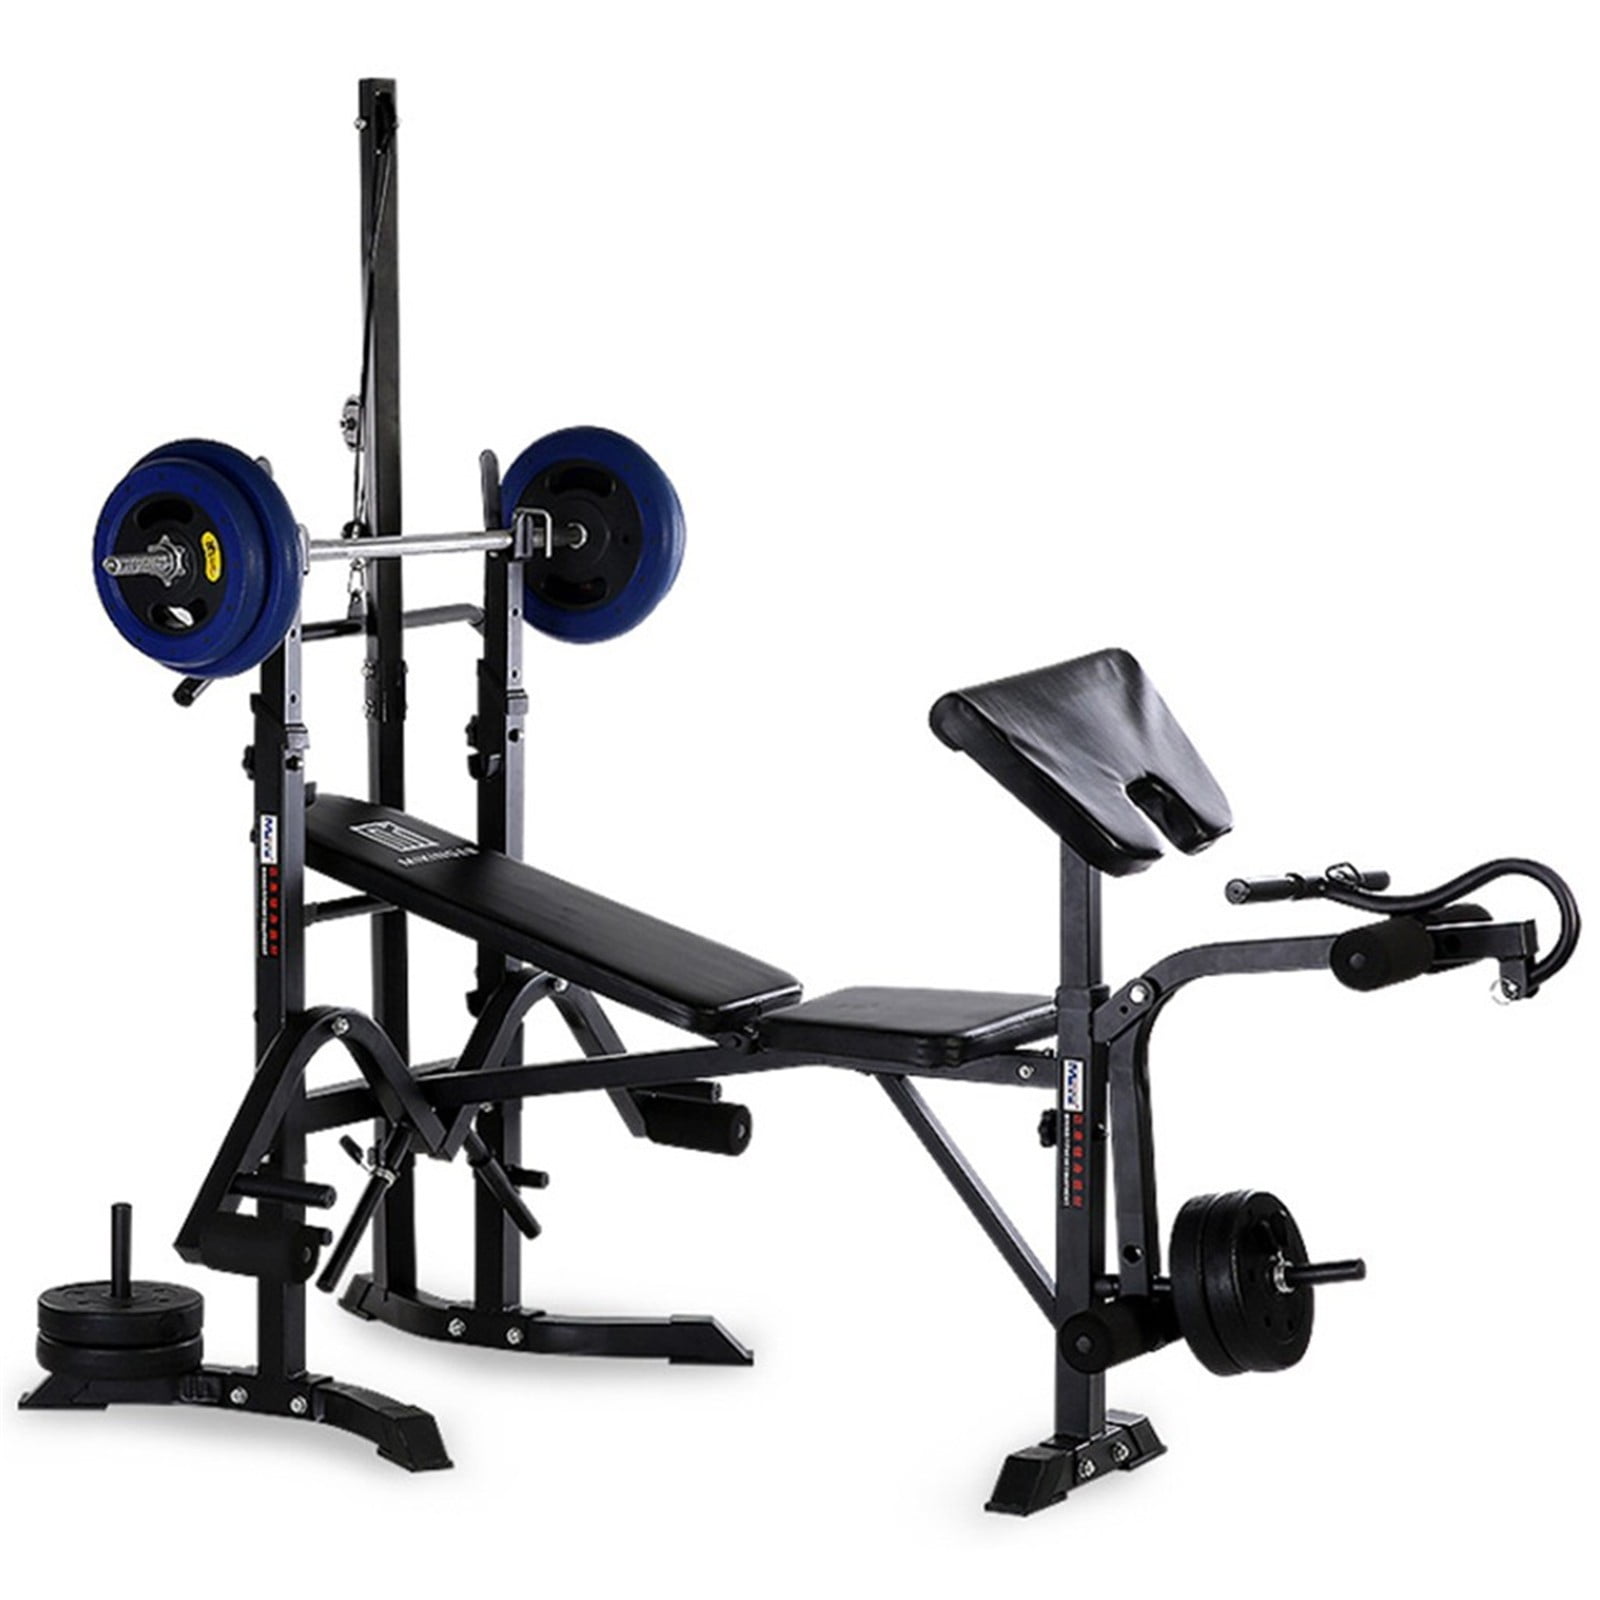 Details about   Gym Exercise 440lbs Olympic Weight Bench Strength Training Lifting Press 